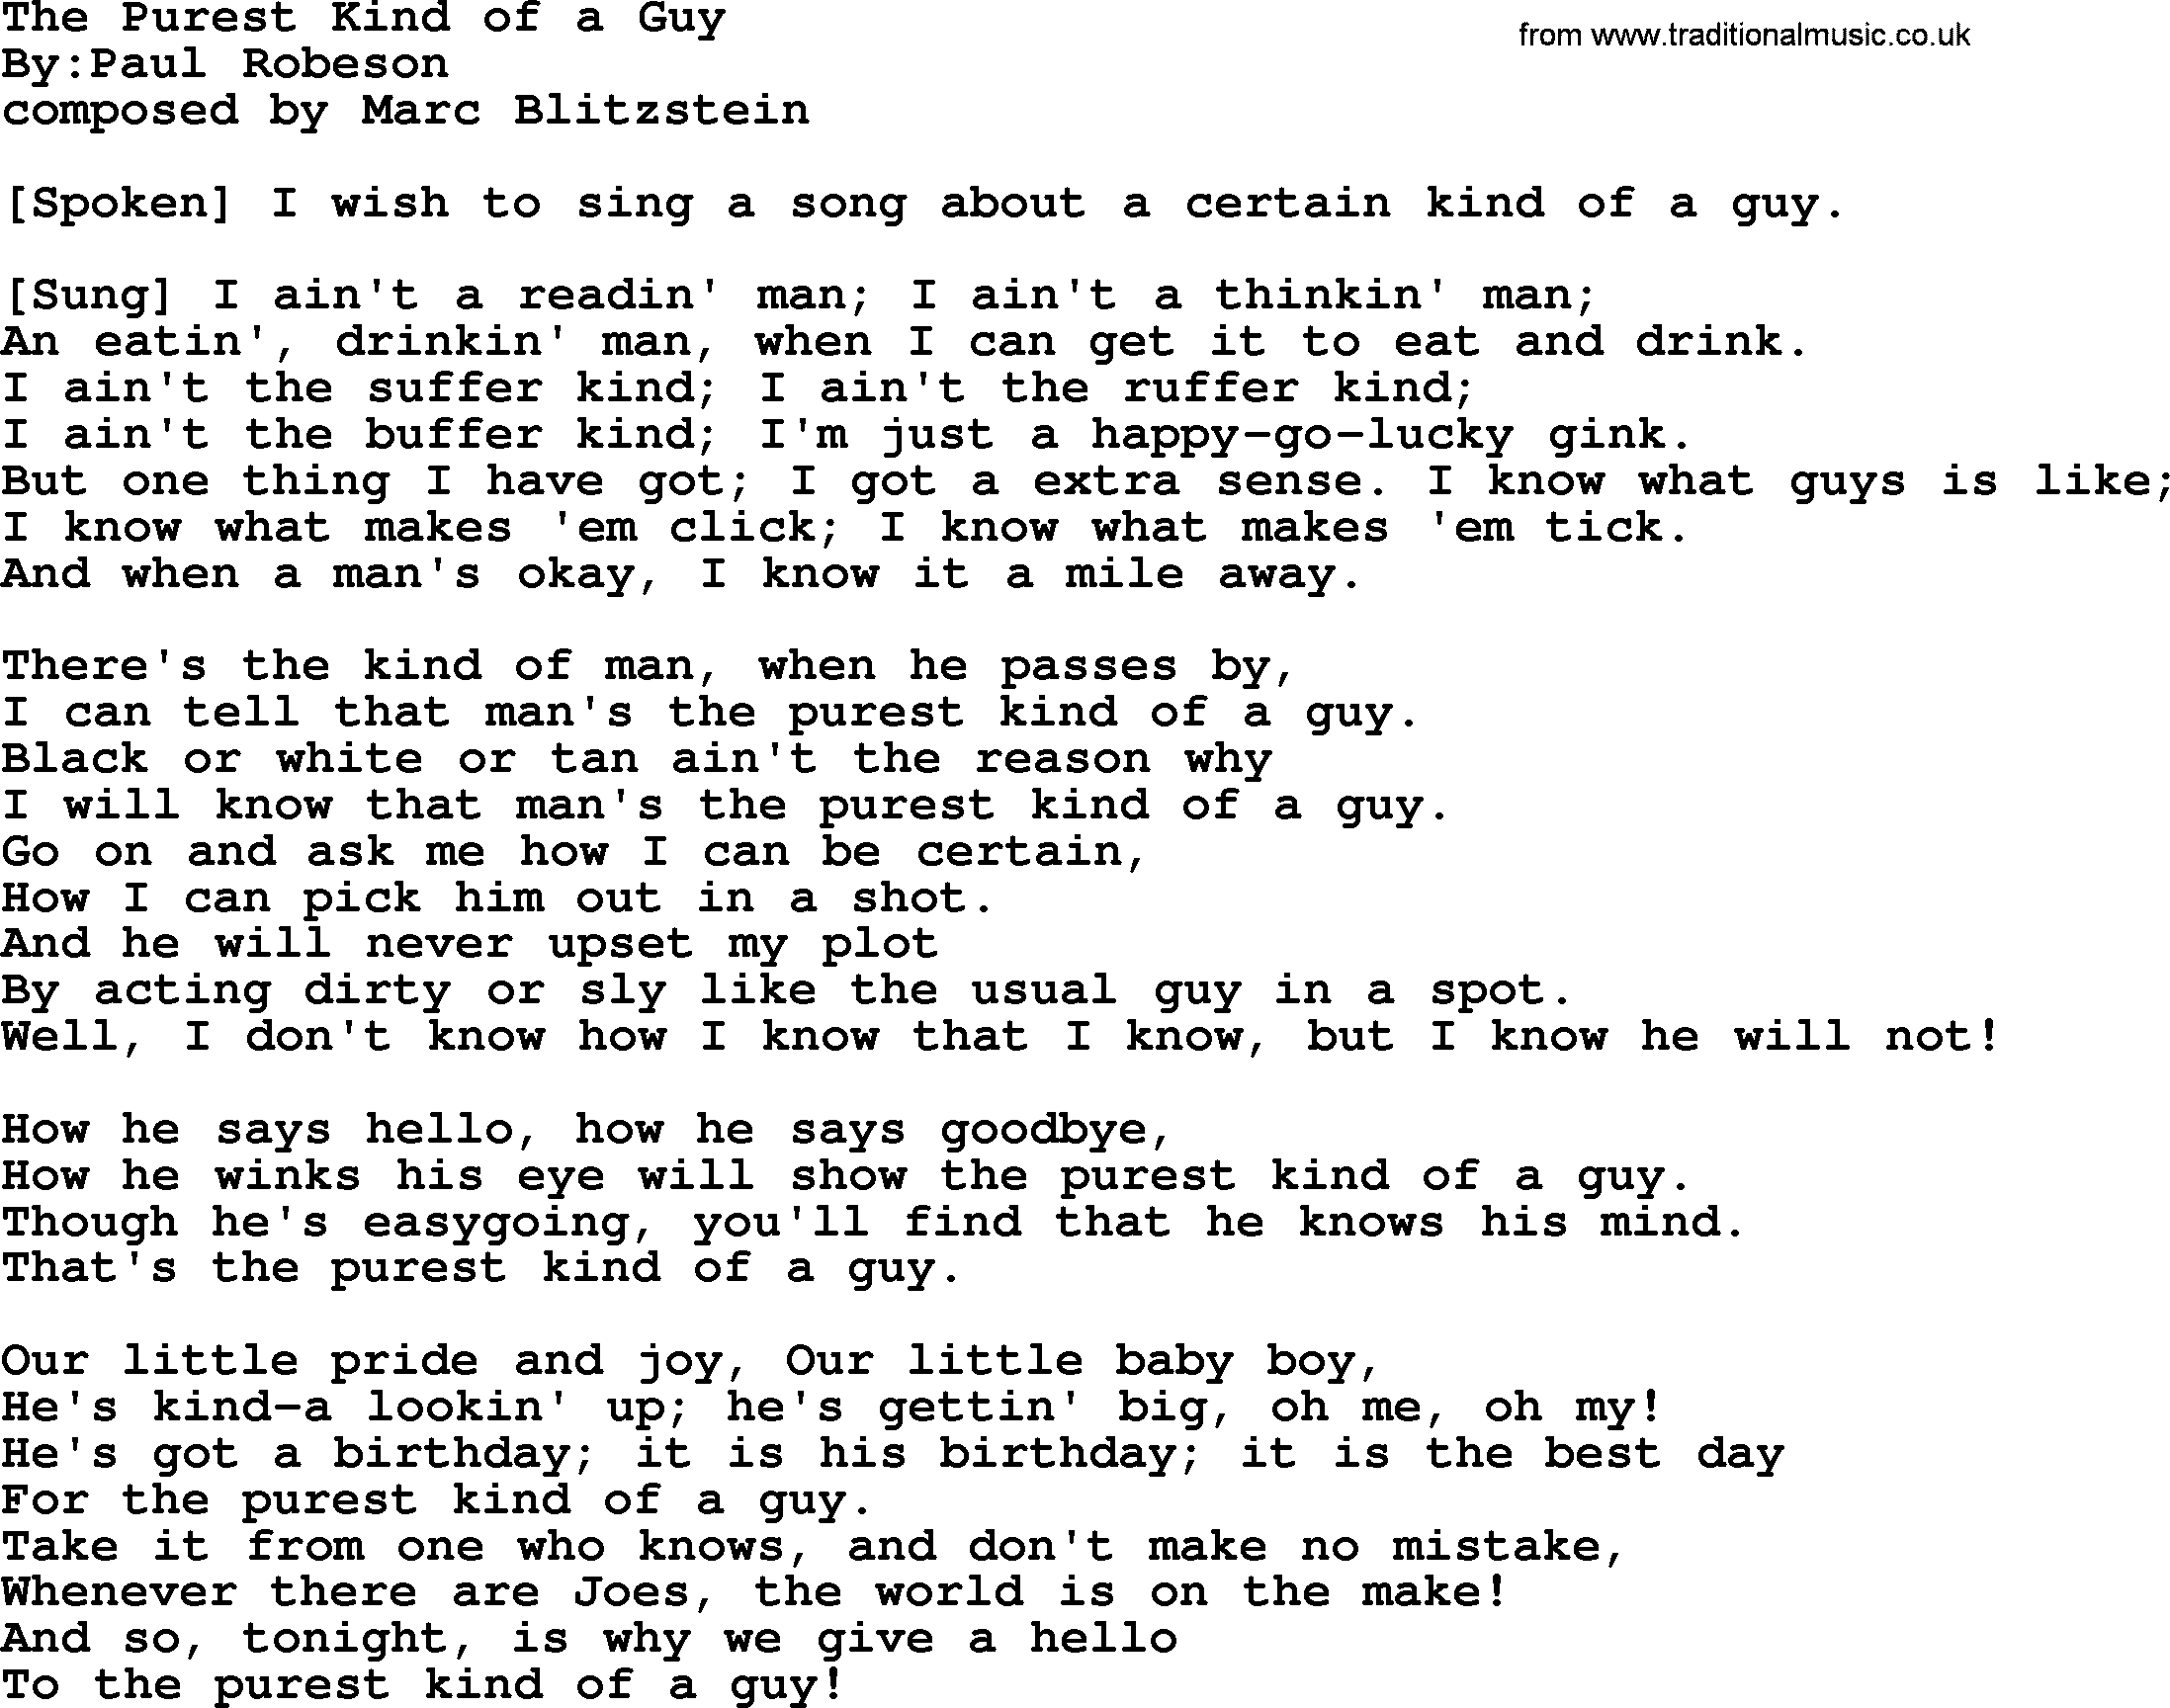 Political, Solidarity, Workers or Union song: The Purest Kind Of A Guy, lyrics